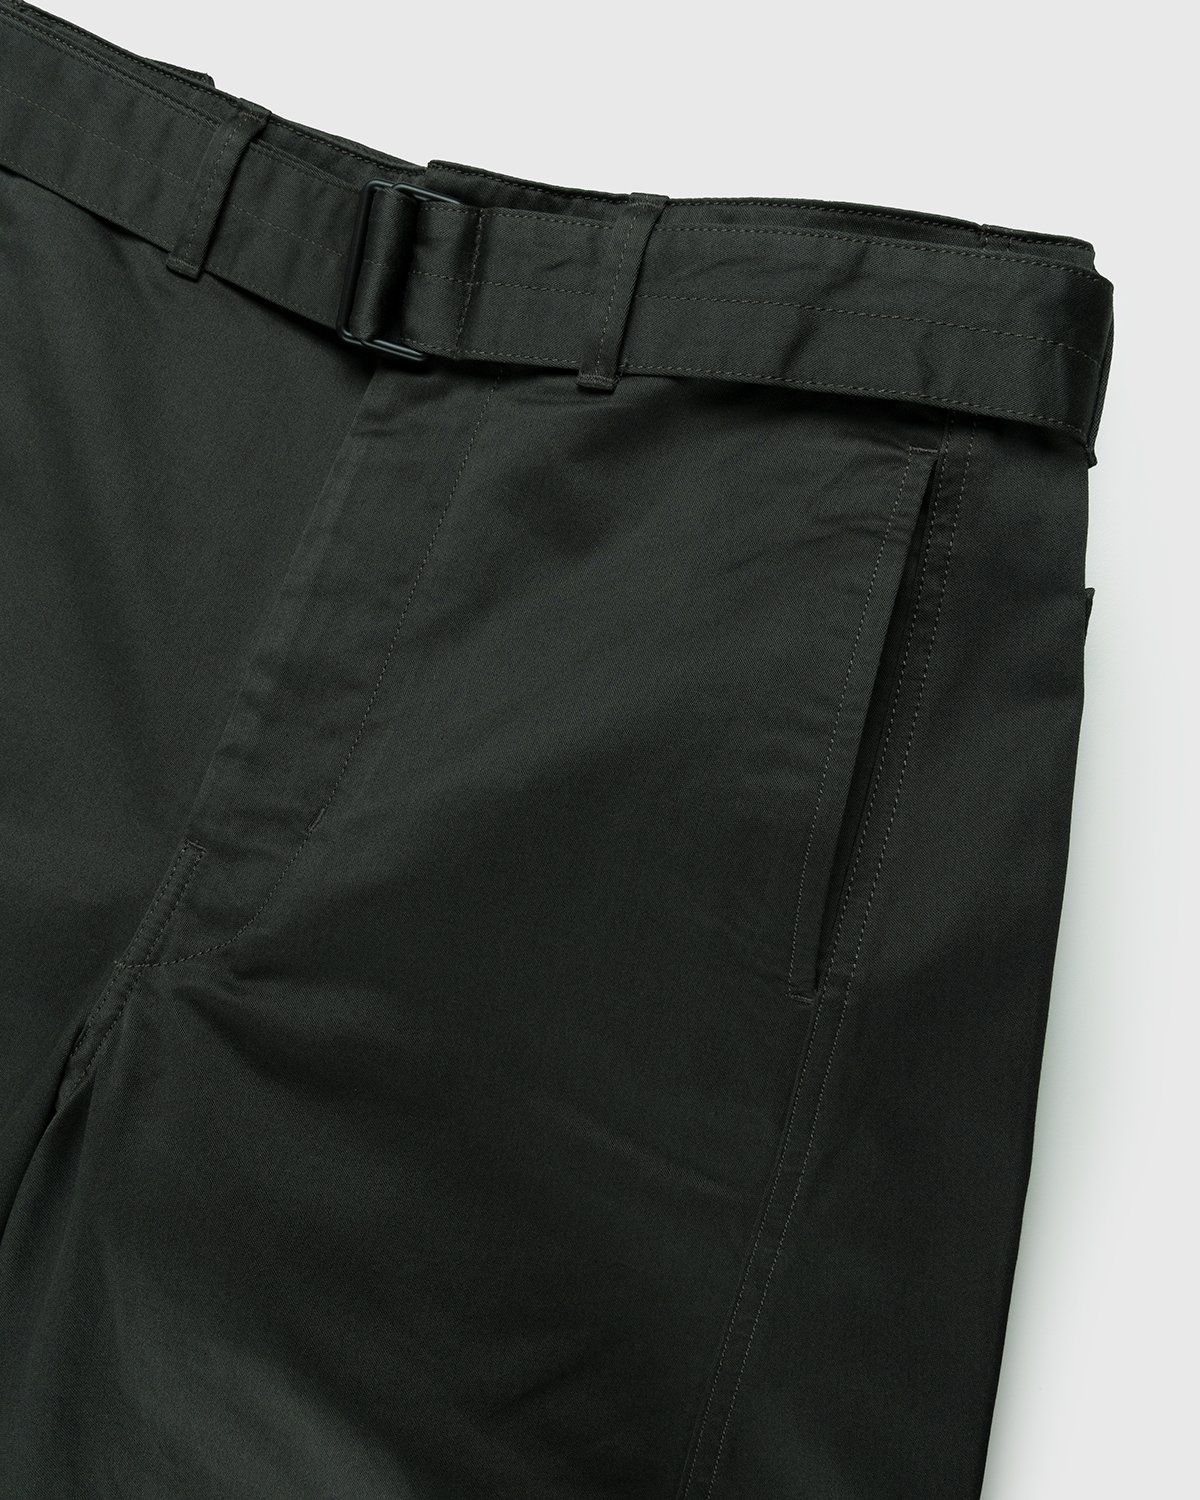 Lemaire – Twisted Belted Pants Dark Slate Green - Image 4